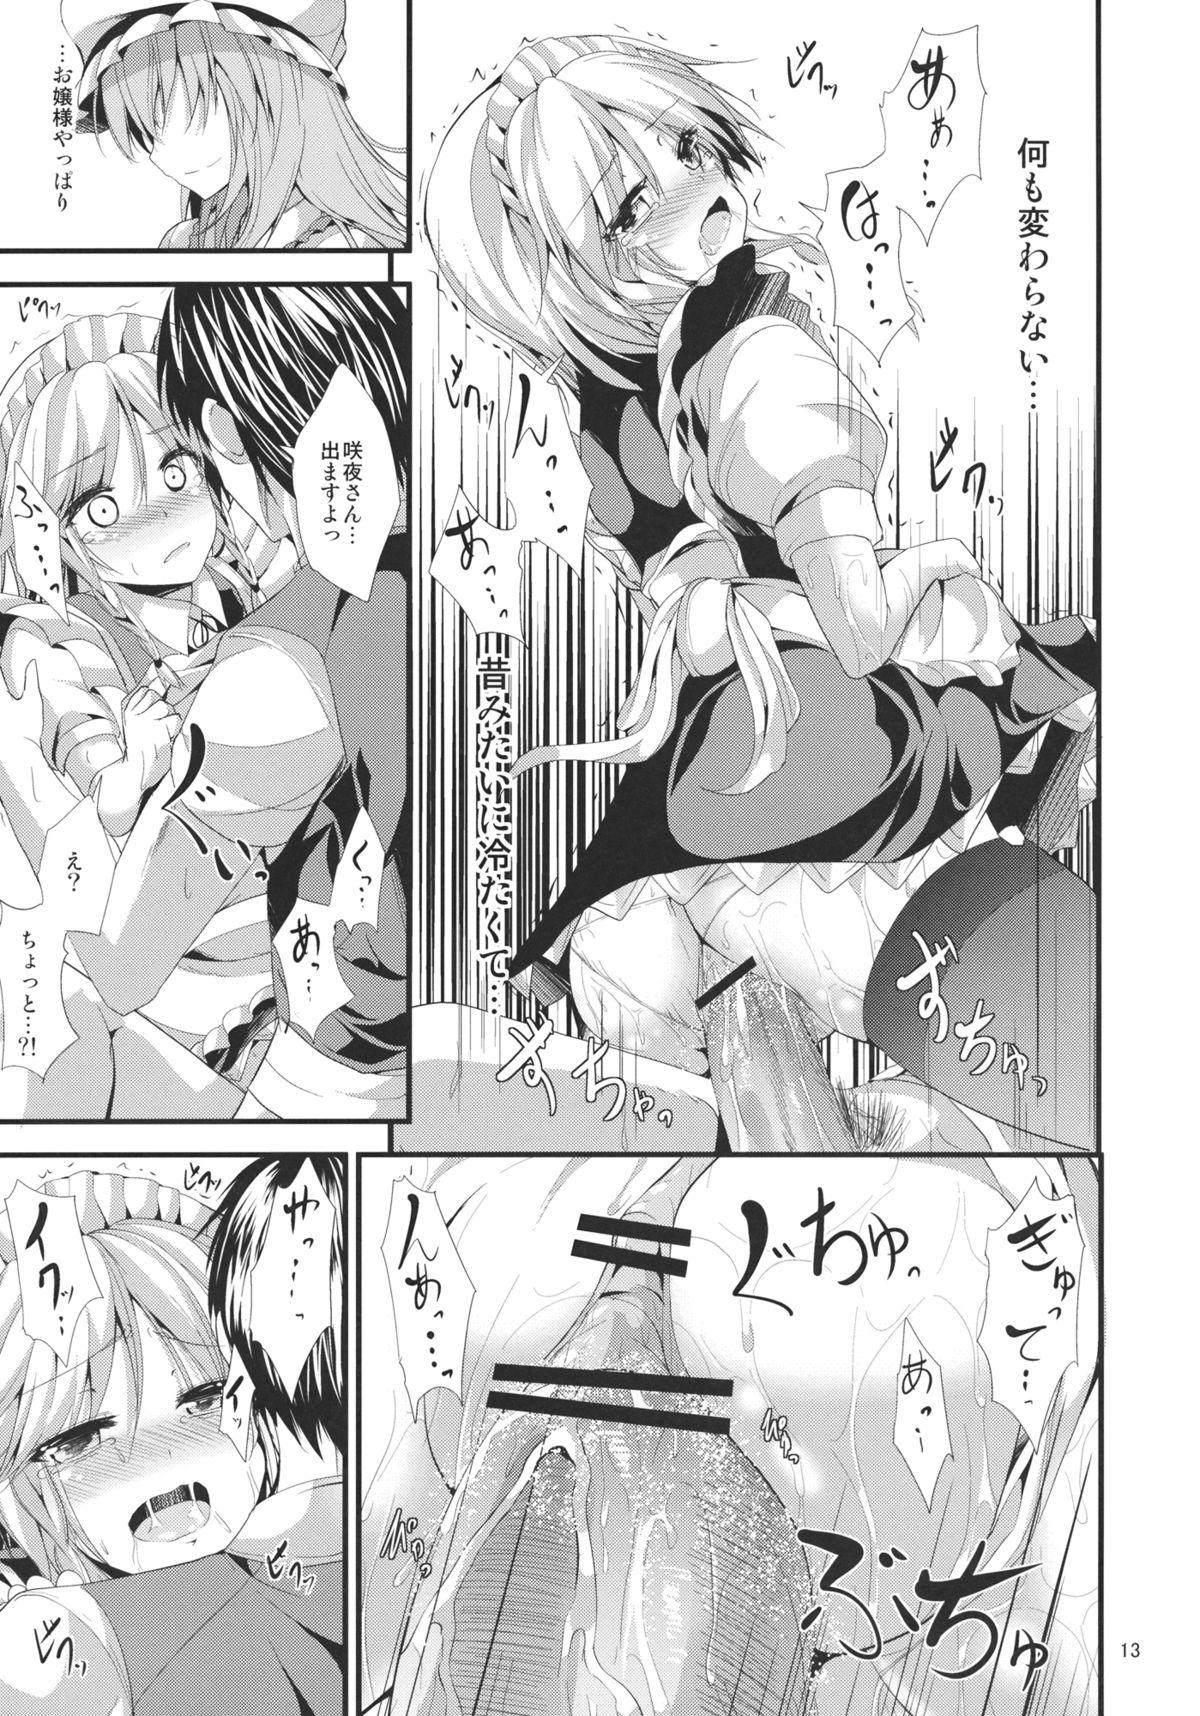 Oiled Summer vacation - Touhou project Interracial Sex - Page 10